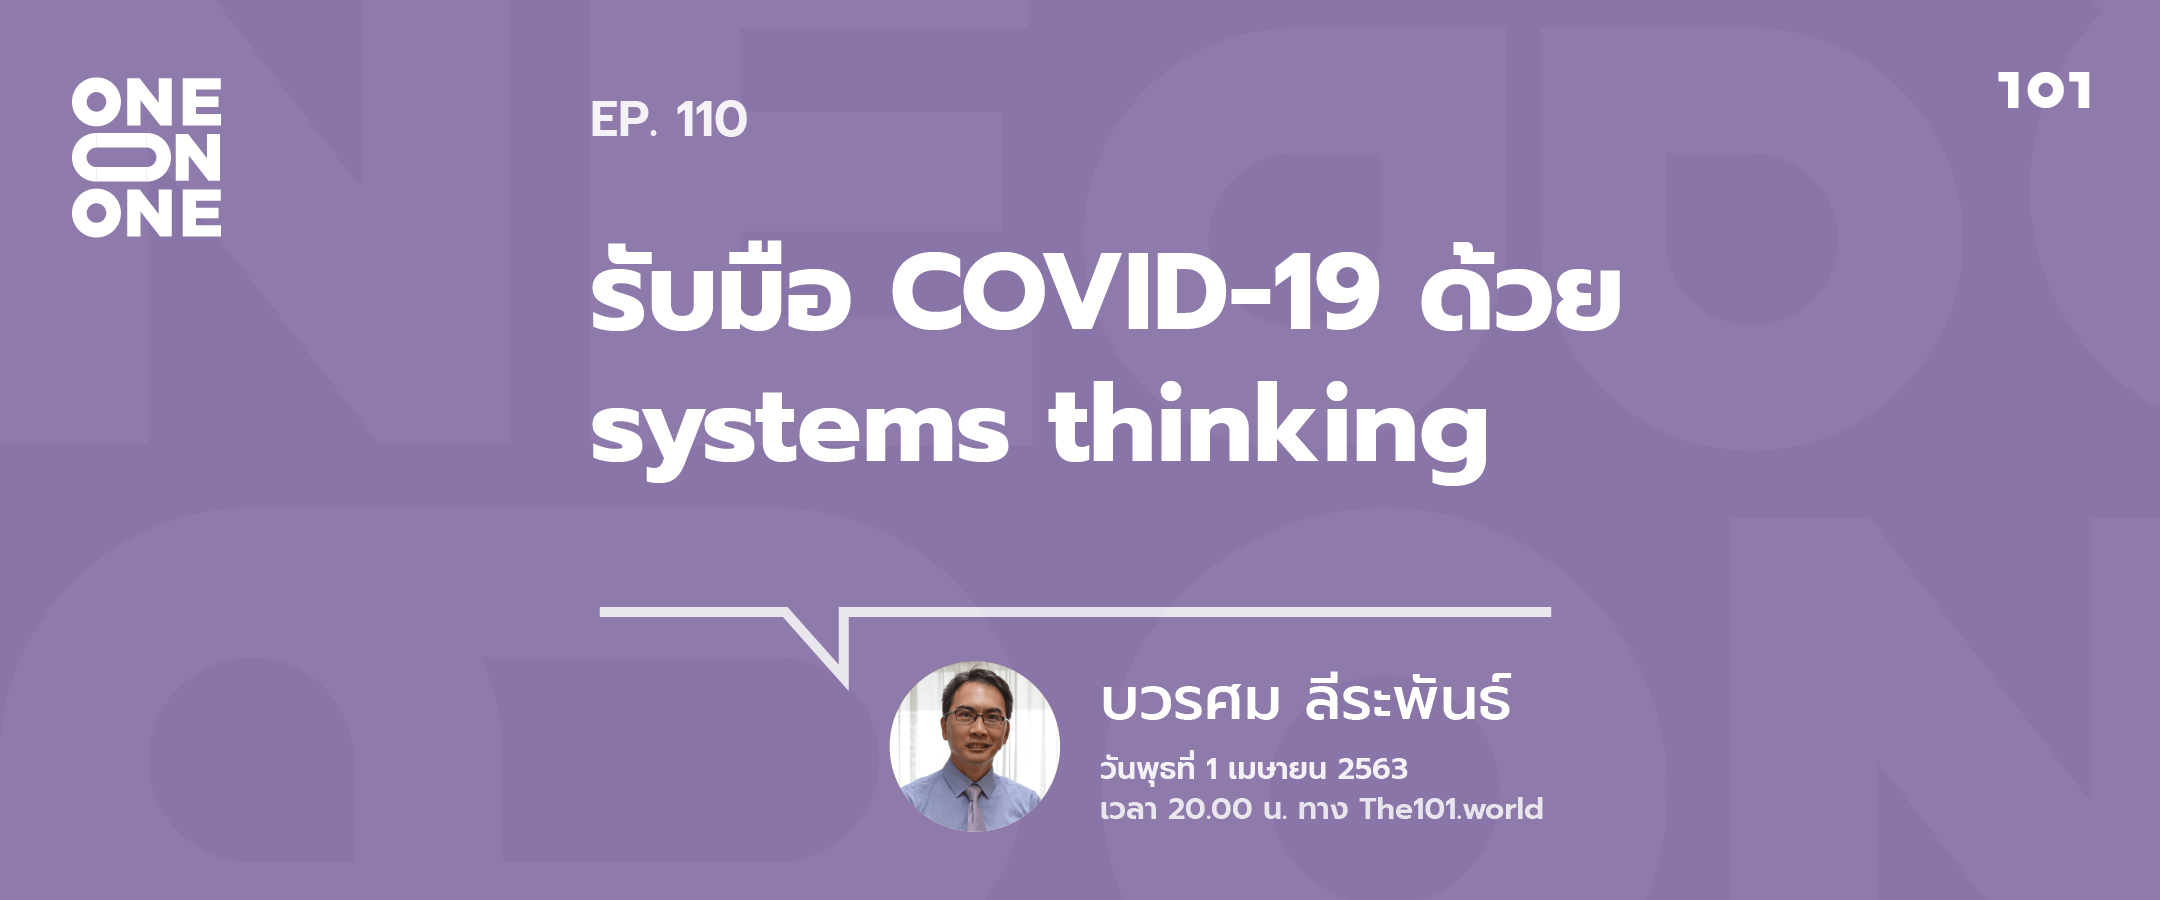 101 One-on-One ep.110 : “รับมือ COVID-19 ด้วย systems thinking”